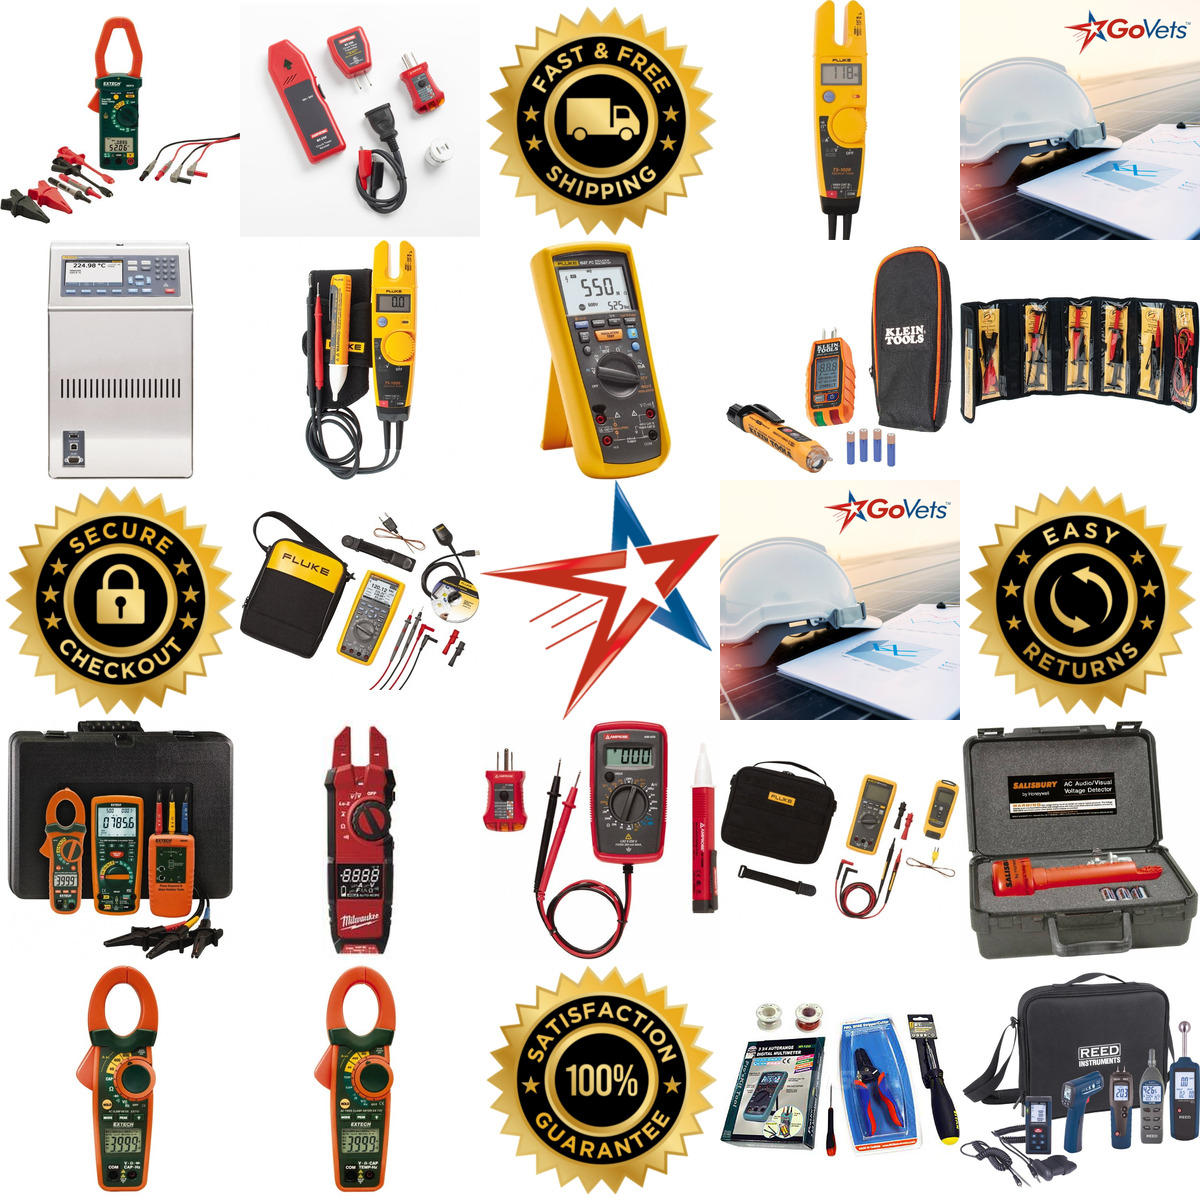 A selection of Electrical Test Equipment Combination Kits products on GoVets